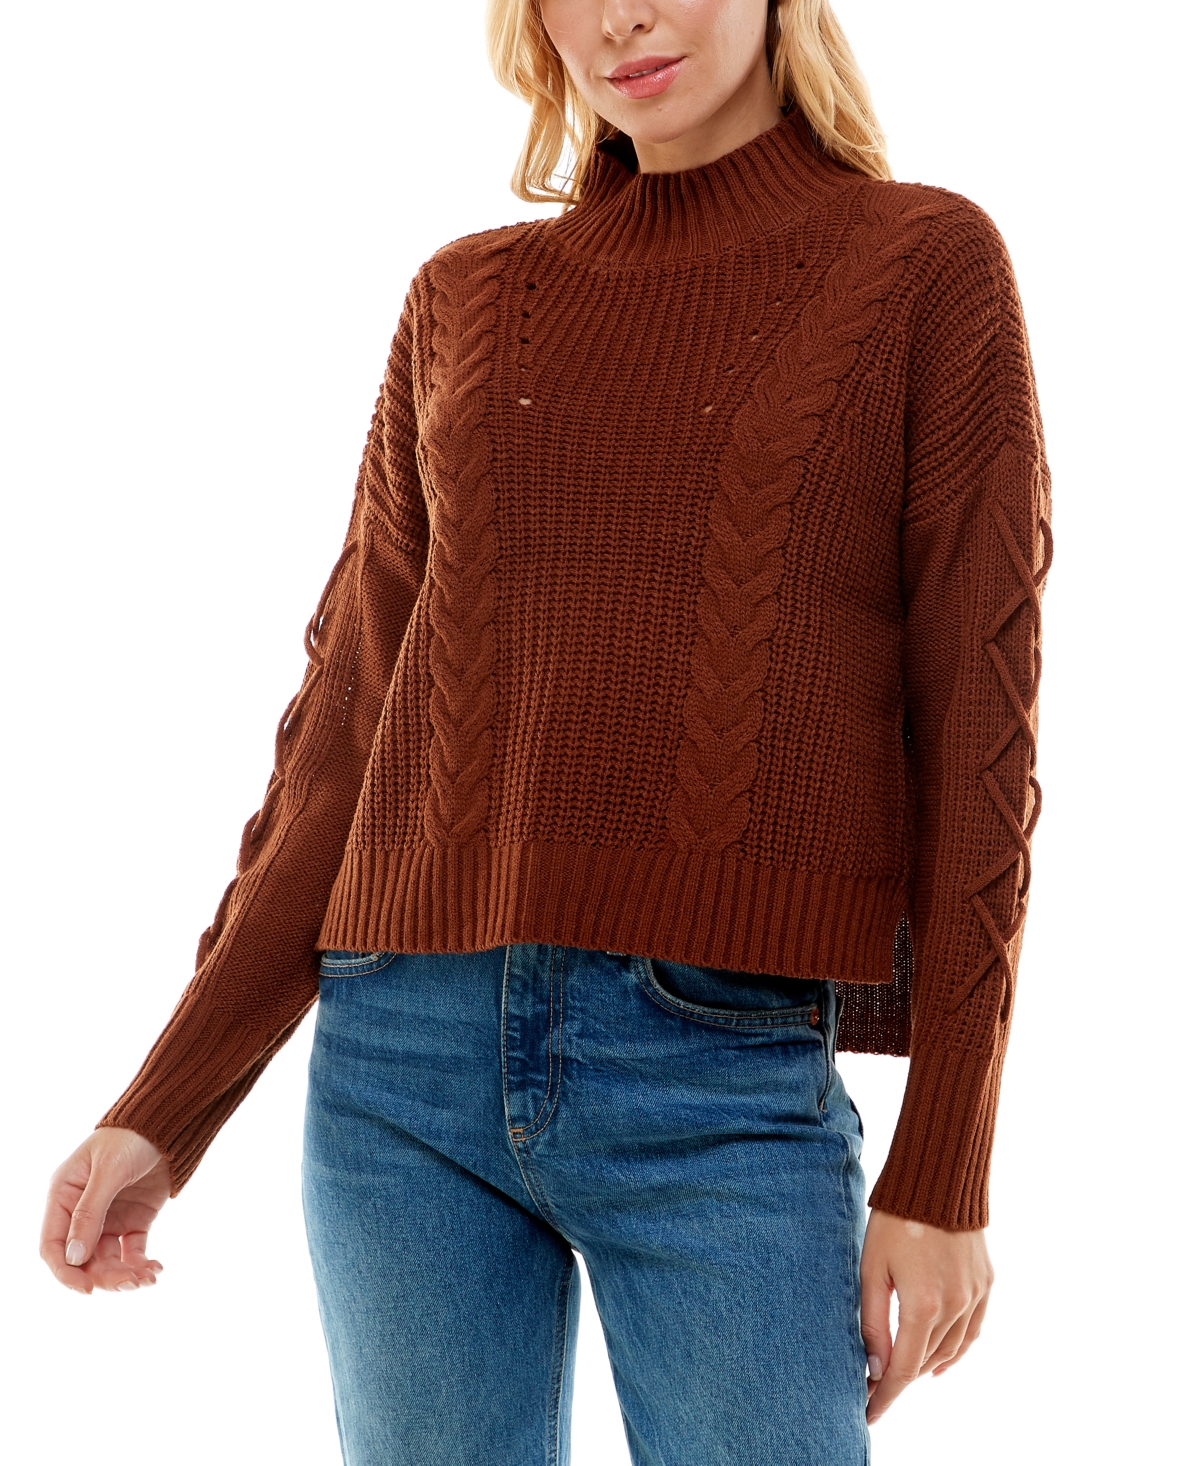 Juniors' Mock-Neck Lace-Up-Sleeve Sweater - Tortoise Shell